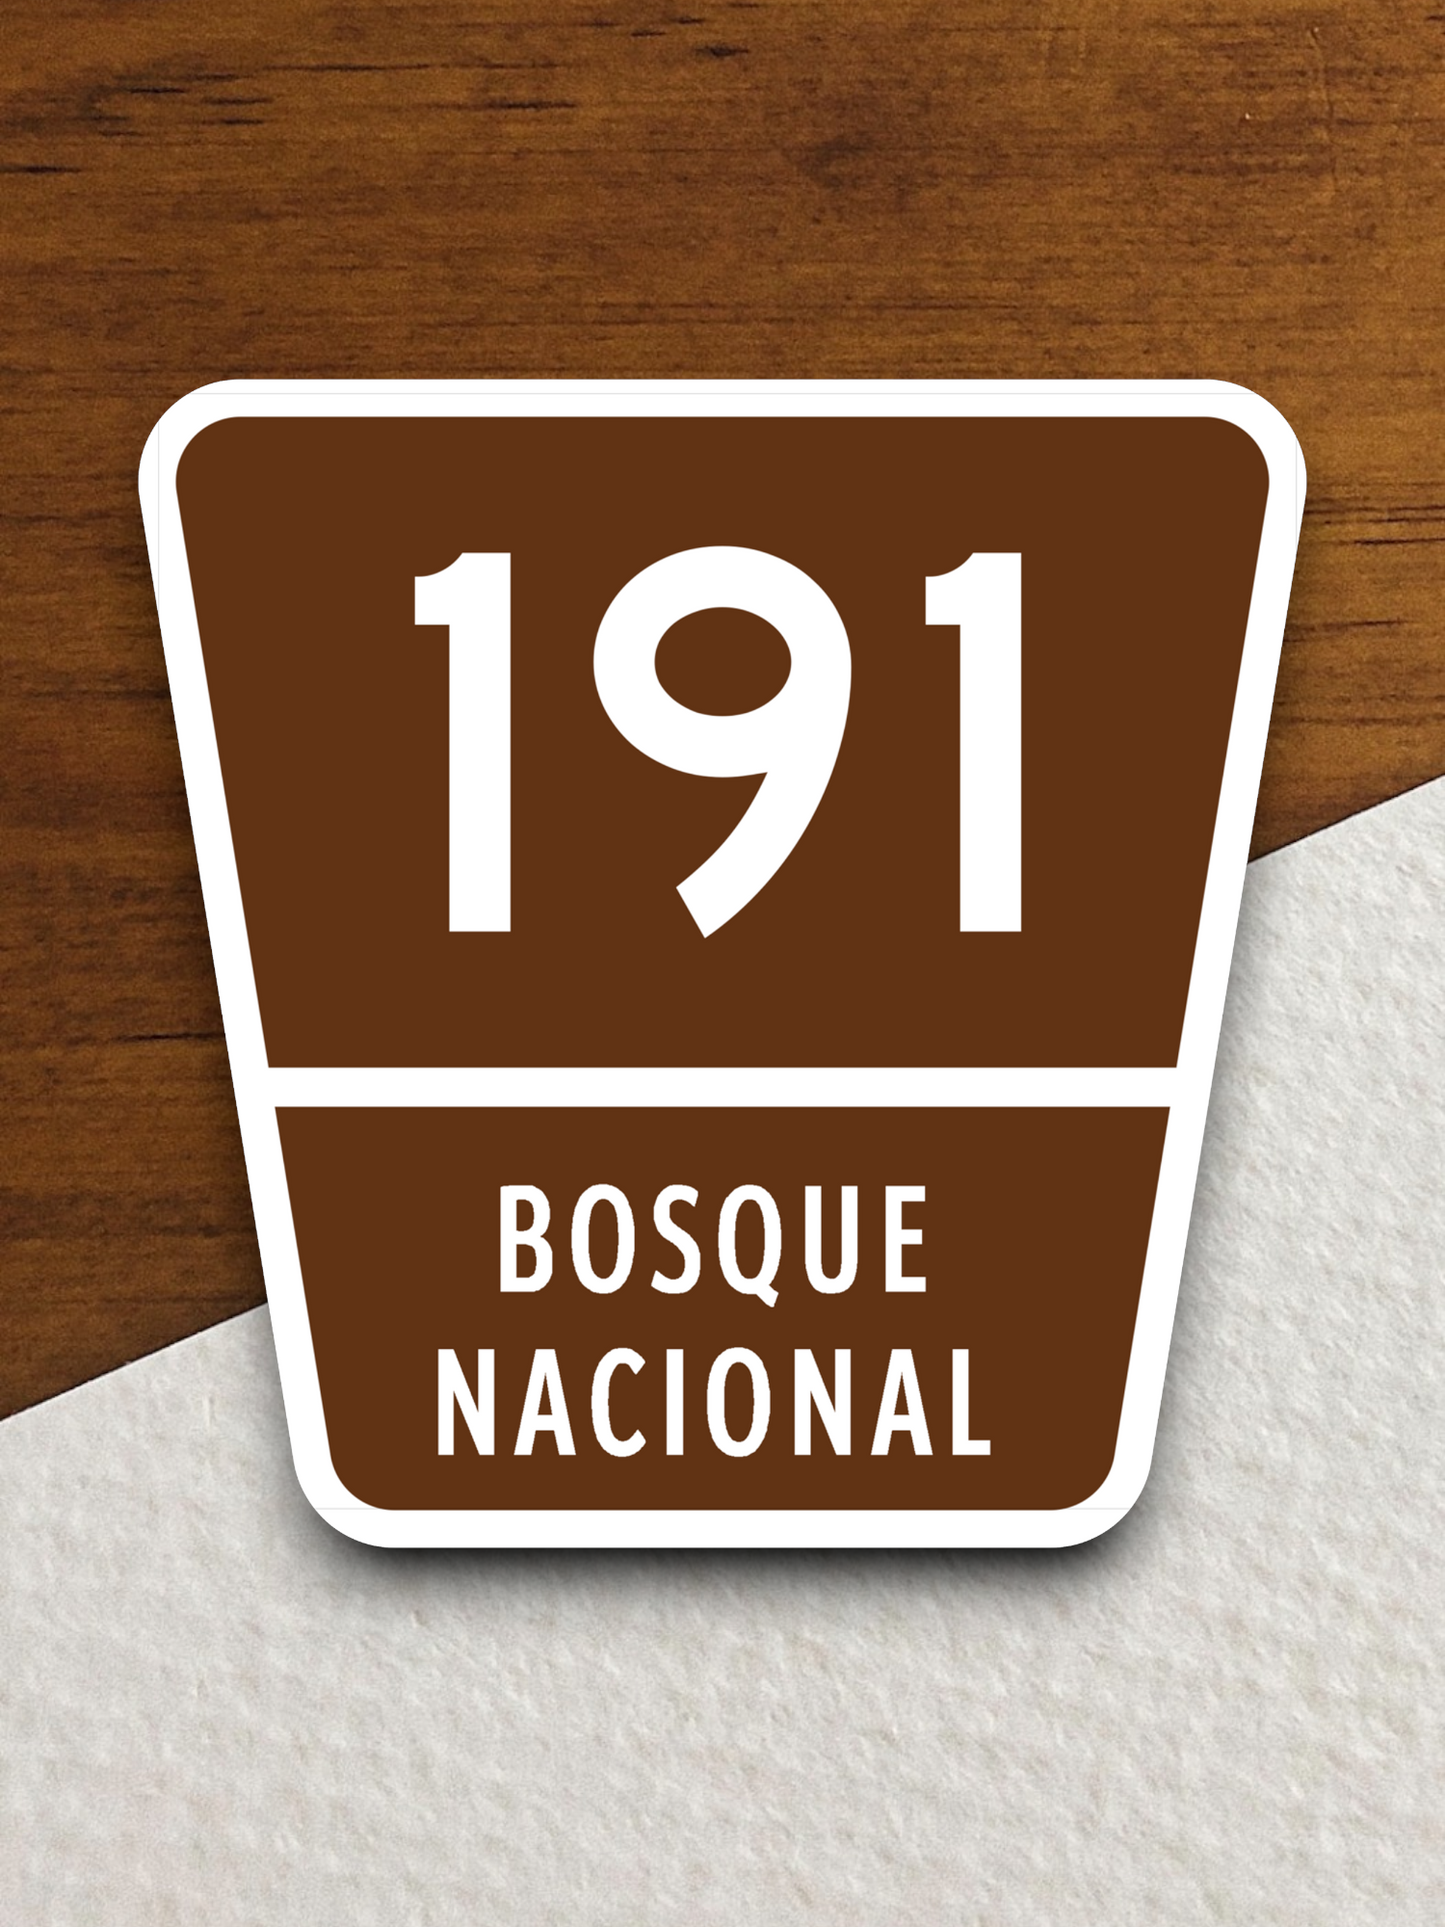 Forest Highway Route 191 - Puerto Rico Sticker